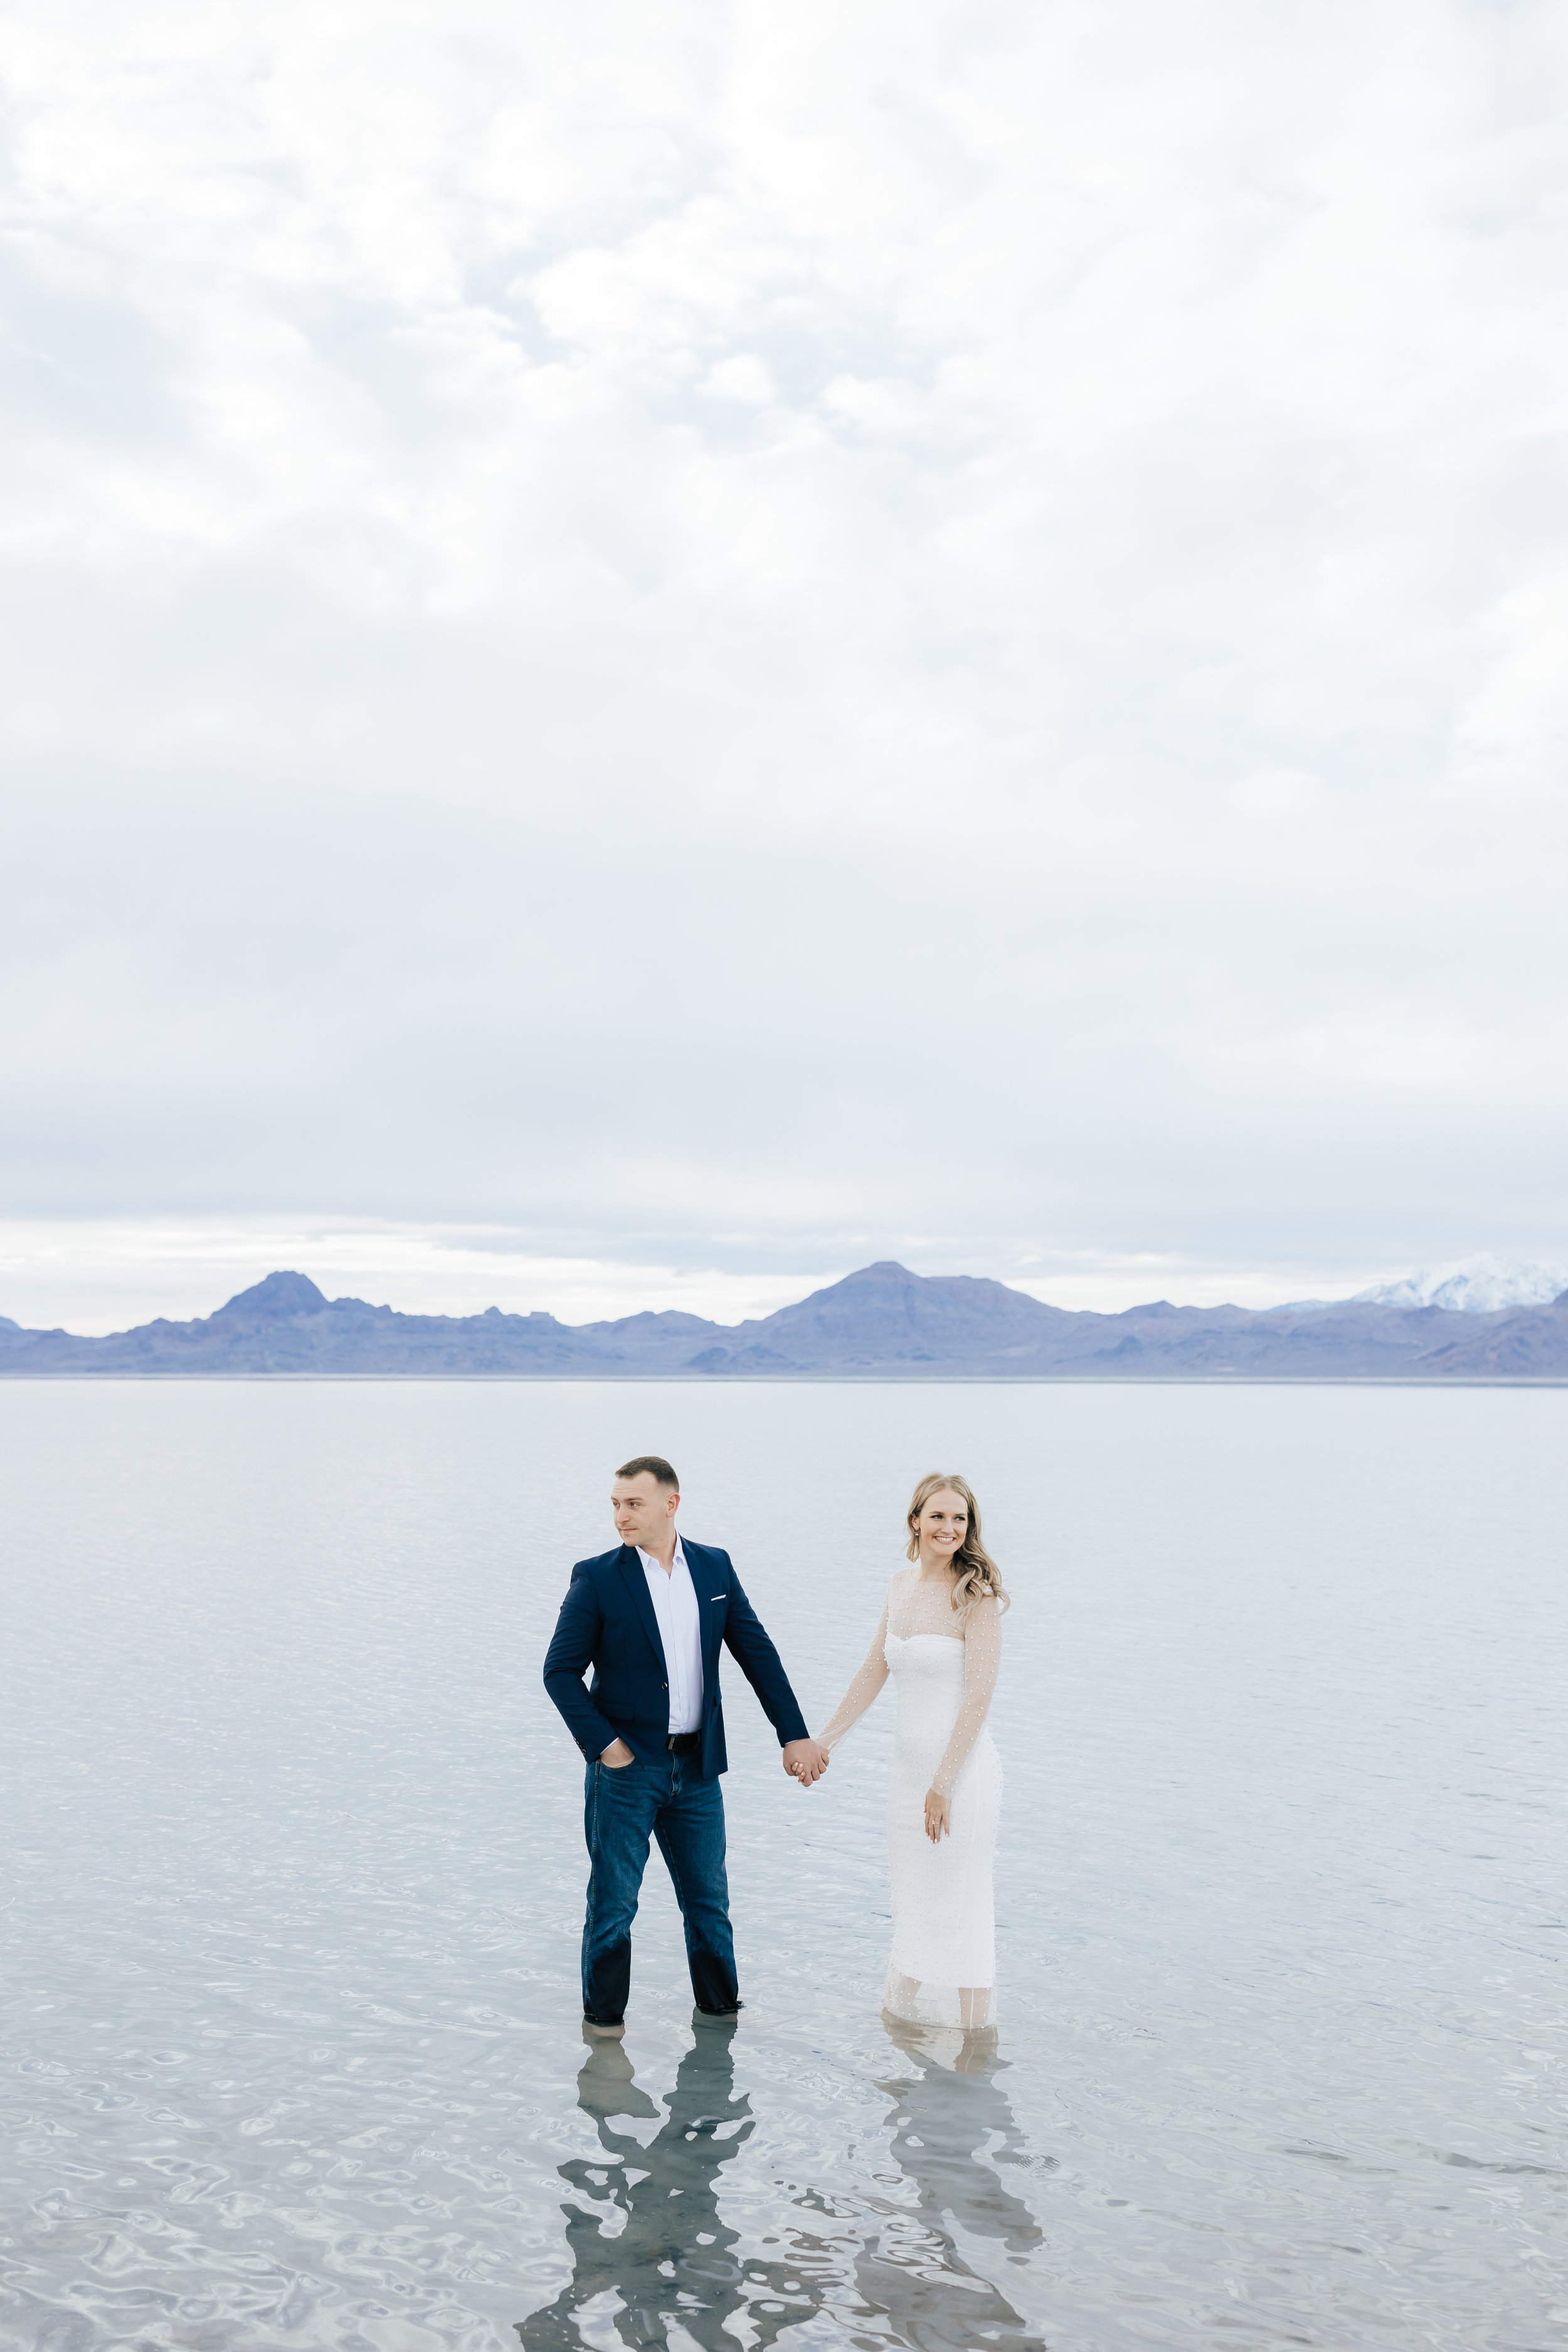  Emily Jenkins Photography captures a man and woman holding hands and walking through shallow water. blue suit and jeans engagement style ideas fancy engagement attire #EmilyJenkinsPhotography #EmilyJenkinsEngagements #BonnevilleSaltFlats #SaltFlatEn